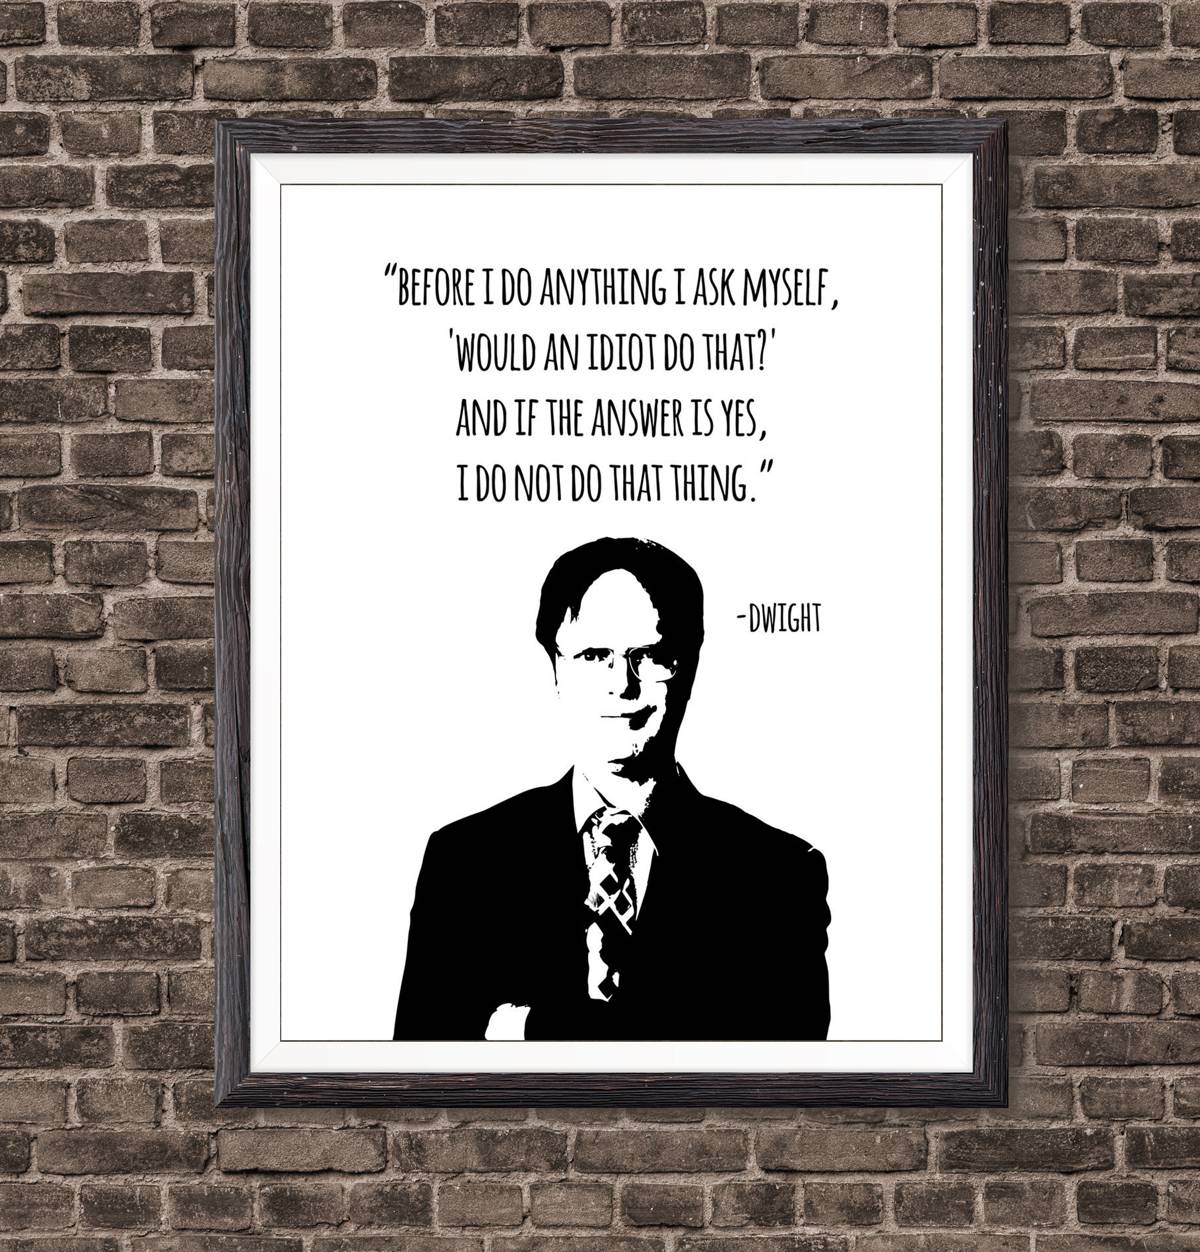 the-office-tv-show-dwight-schrute-idiot-quote-print-home-decor-poster-poster-canvas-print